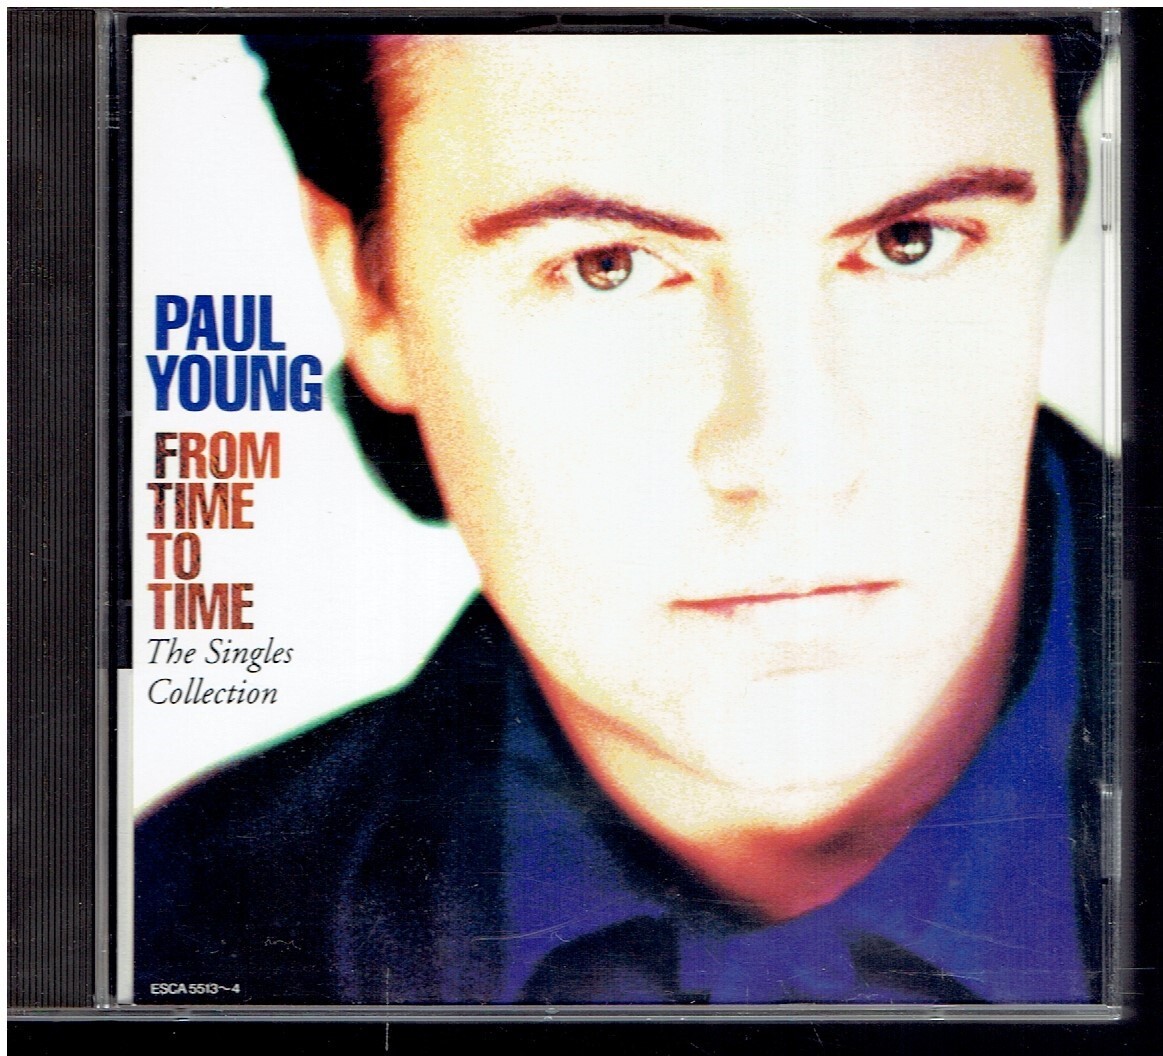 CD★Paul Young　ポール・ヤング★FROM TIME TO TIME　【8ｃｍCD付き】　レンタル落ち　国内盤　　ベスト　　鈴木雅之_画像1